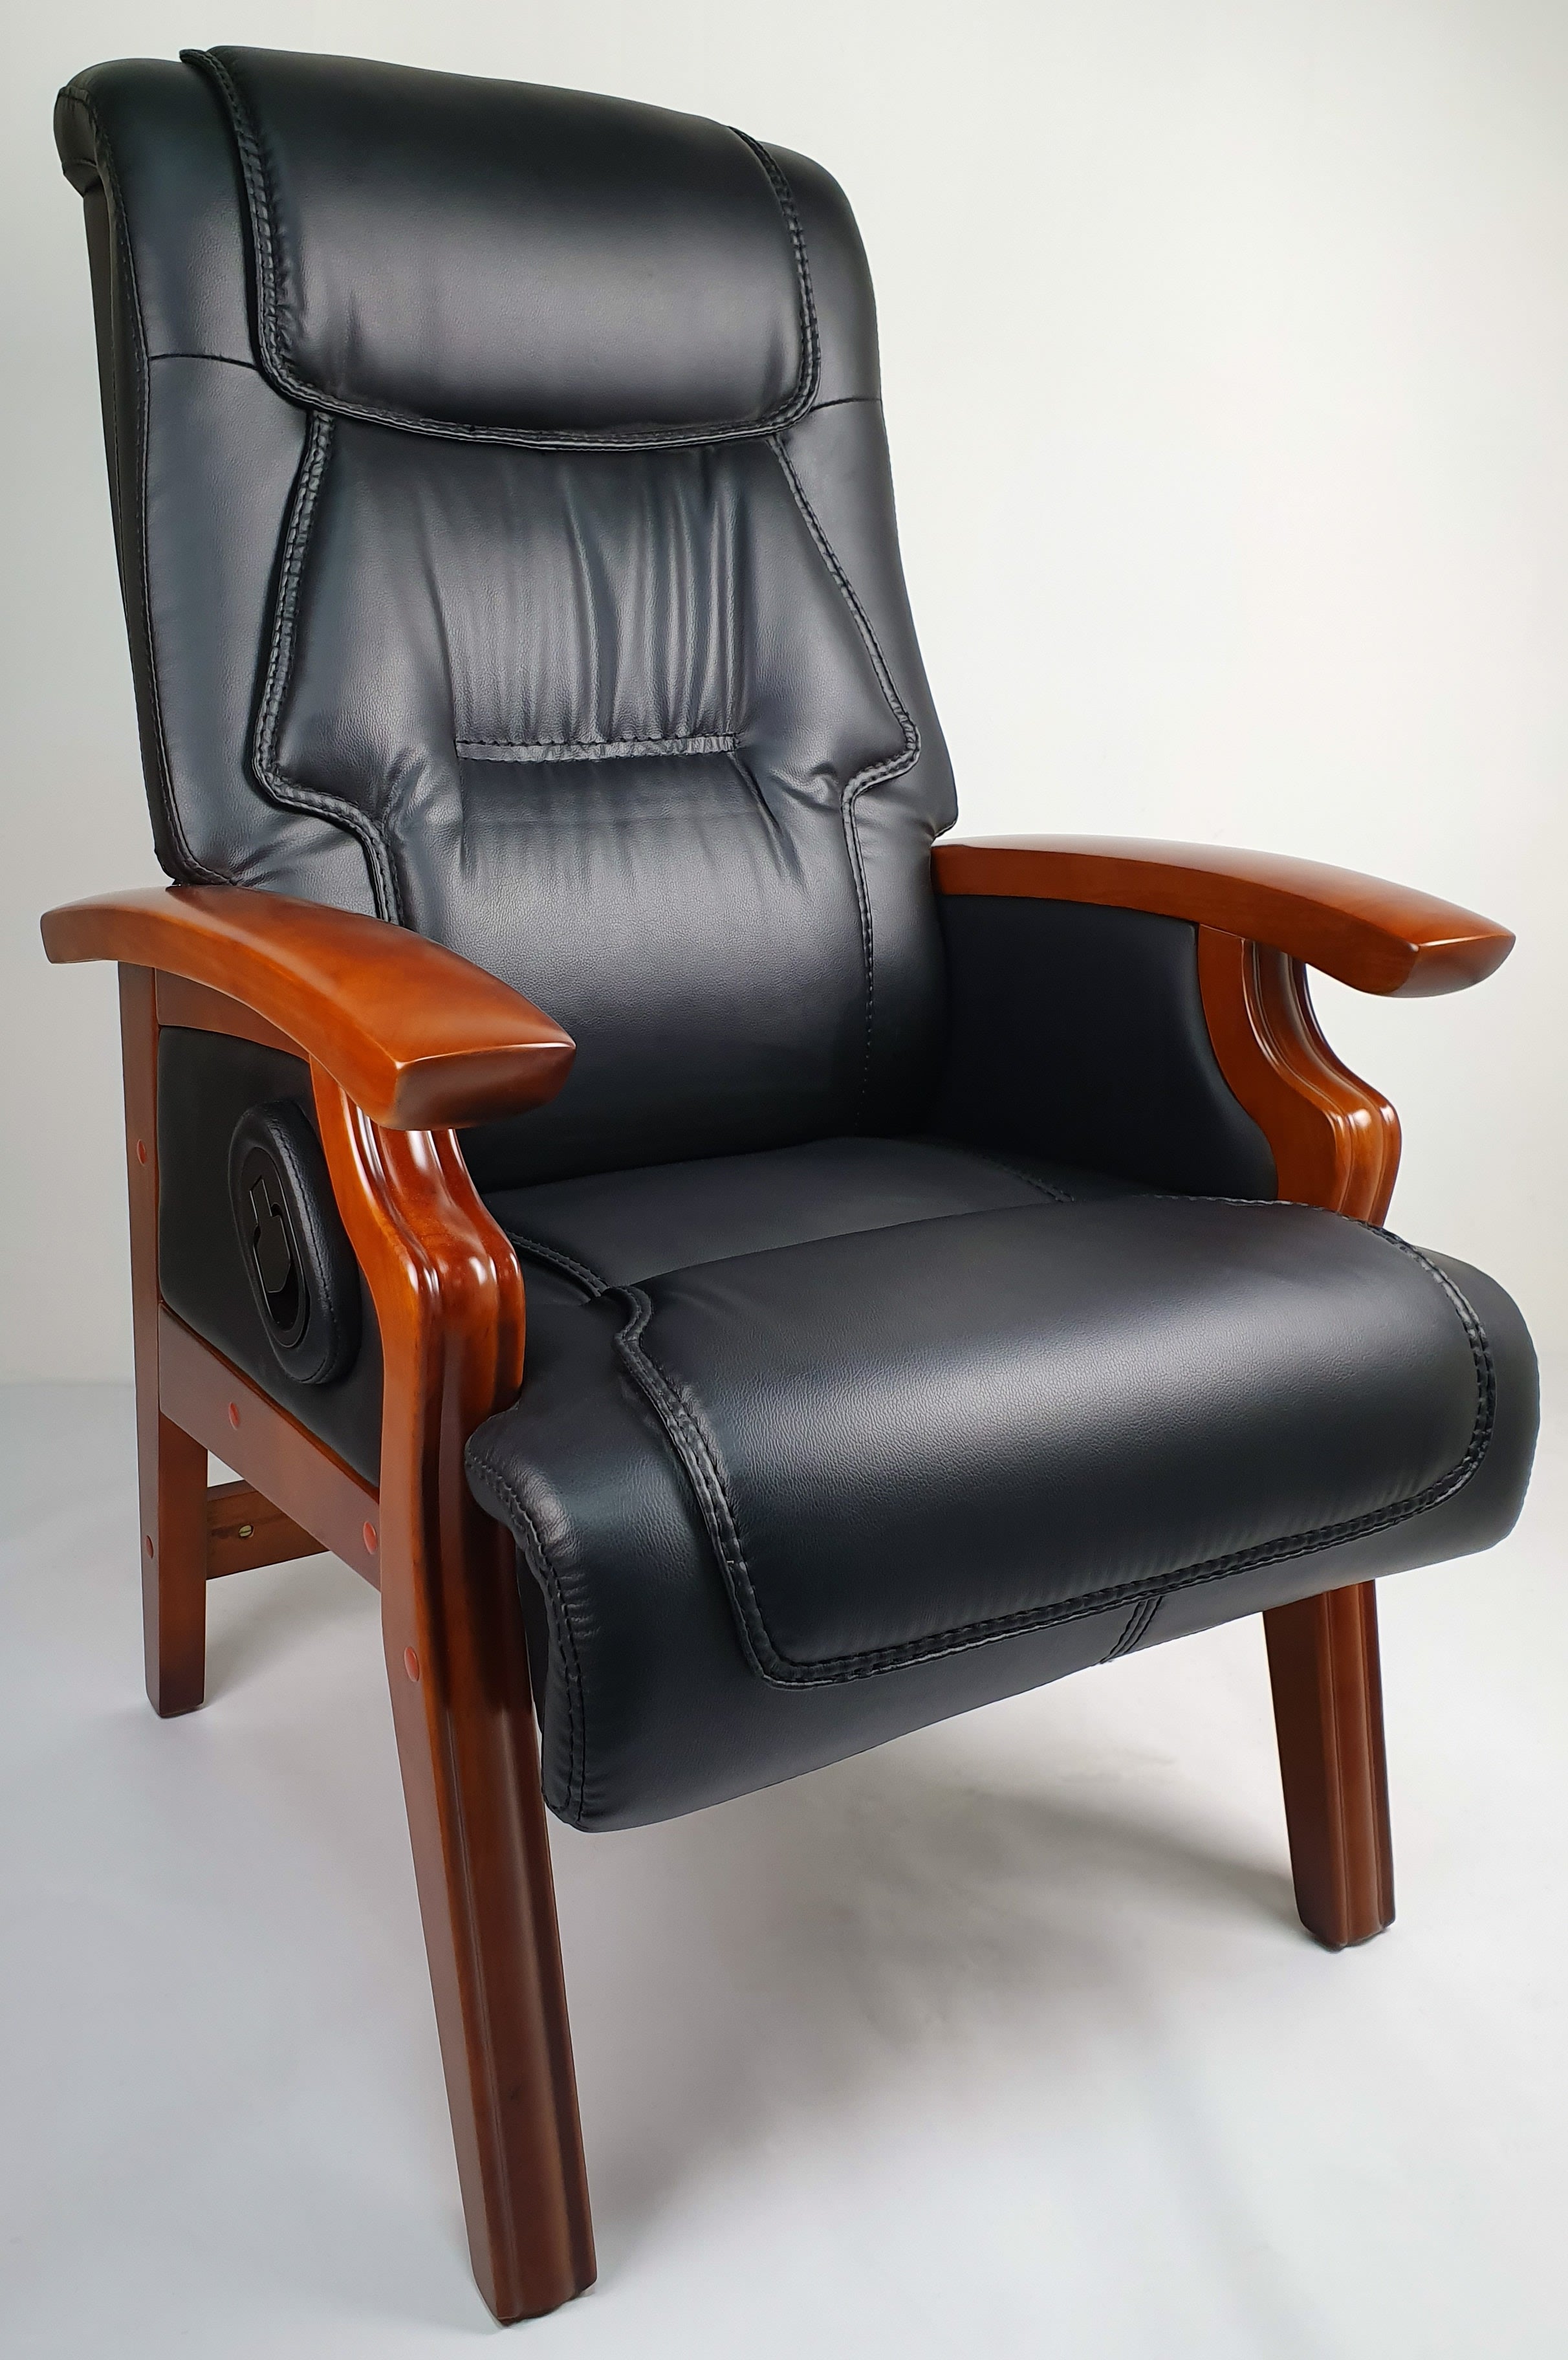 Black Leather Executive Visitor Chair with Built-in Recline - DH1839C